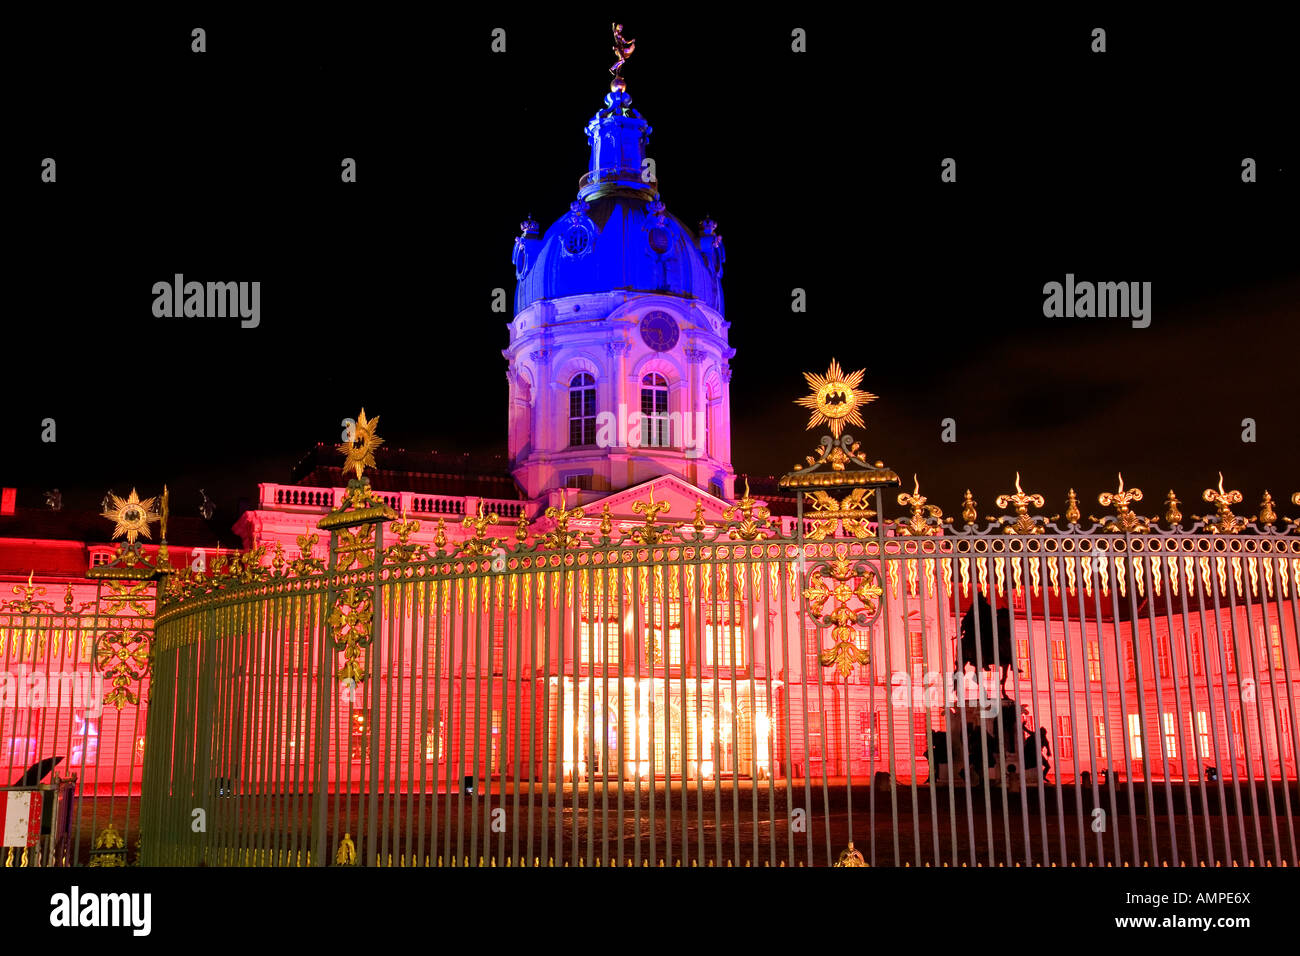 Germany Capital Berlin The illuminated Charlottenburg Palace the summer residence of the Prussian kings built from 1695 to 1713 Stock Photo